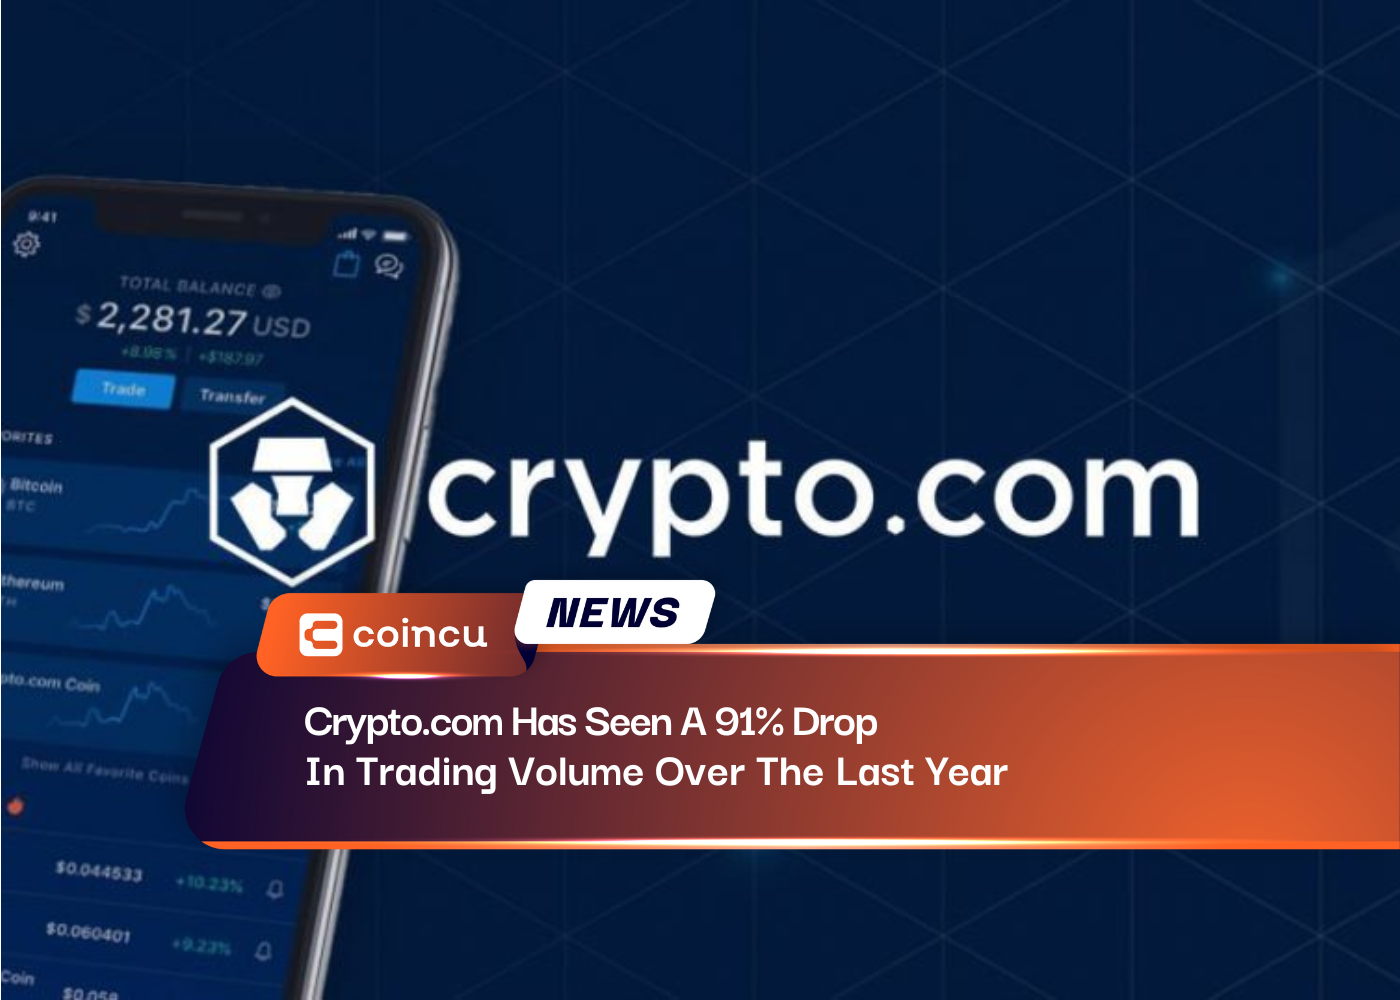 Crypto.com Has Seen A 91% Drop In Trading Volume Over The Last Year